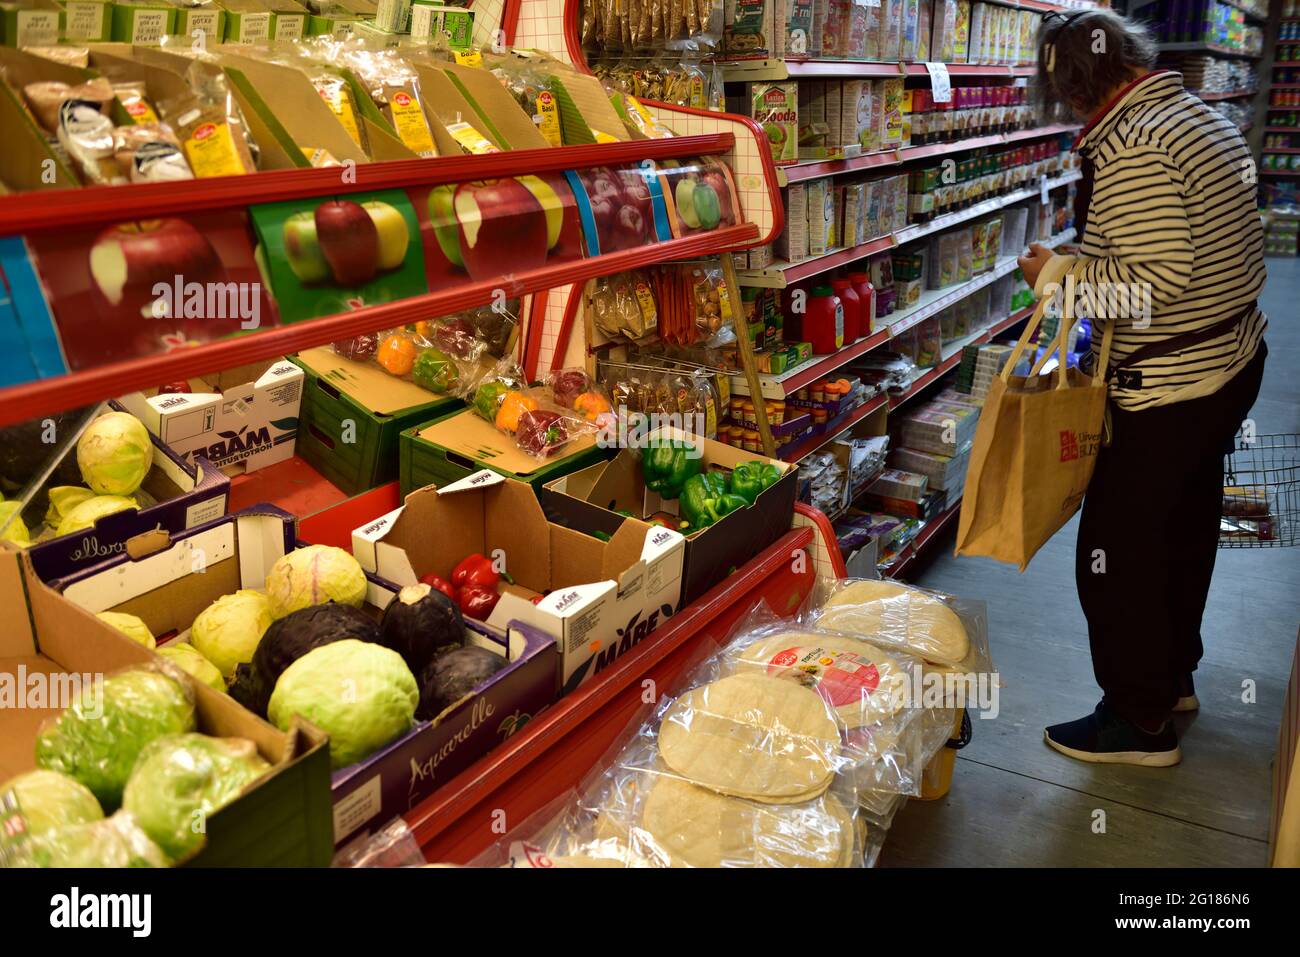 Shopping inside small local grocery store with fresh vegetables, and other foods, UK Stock Photo